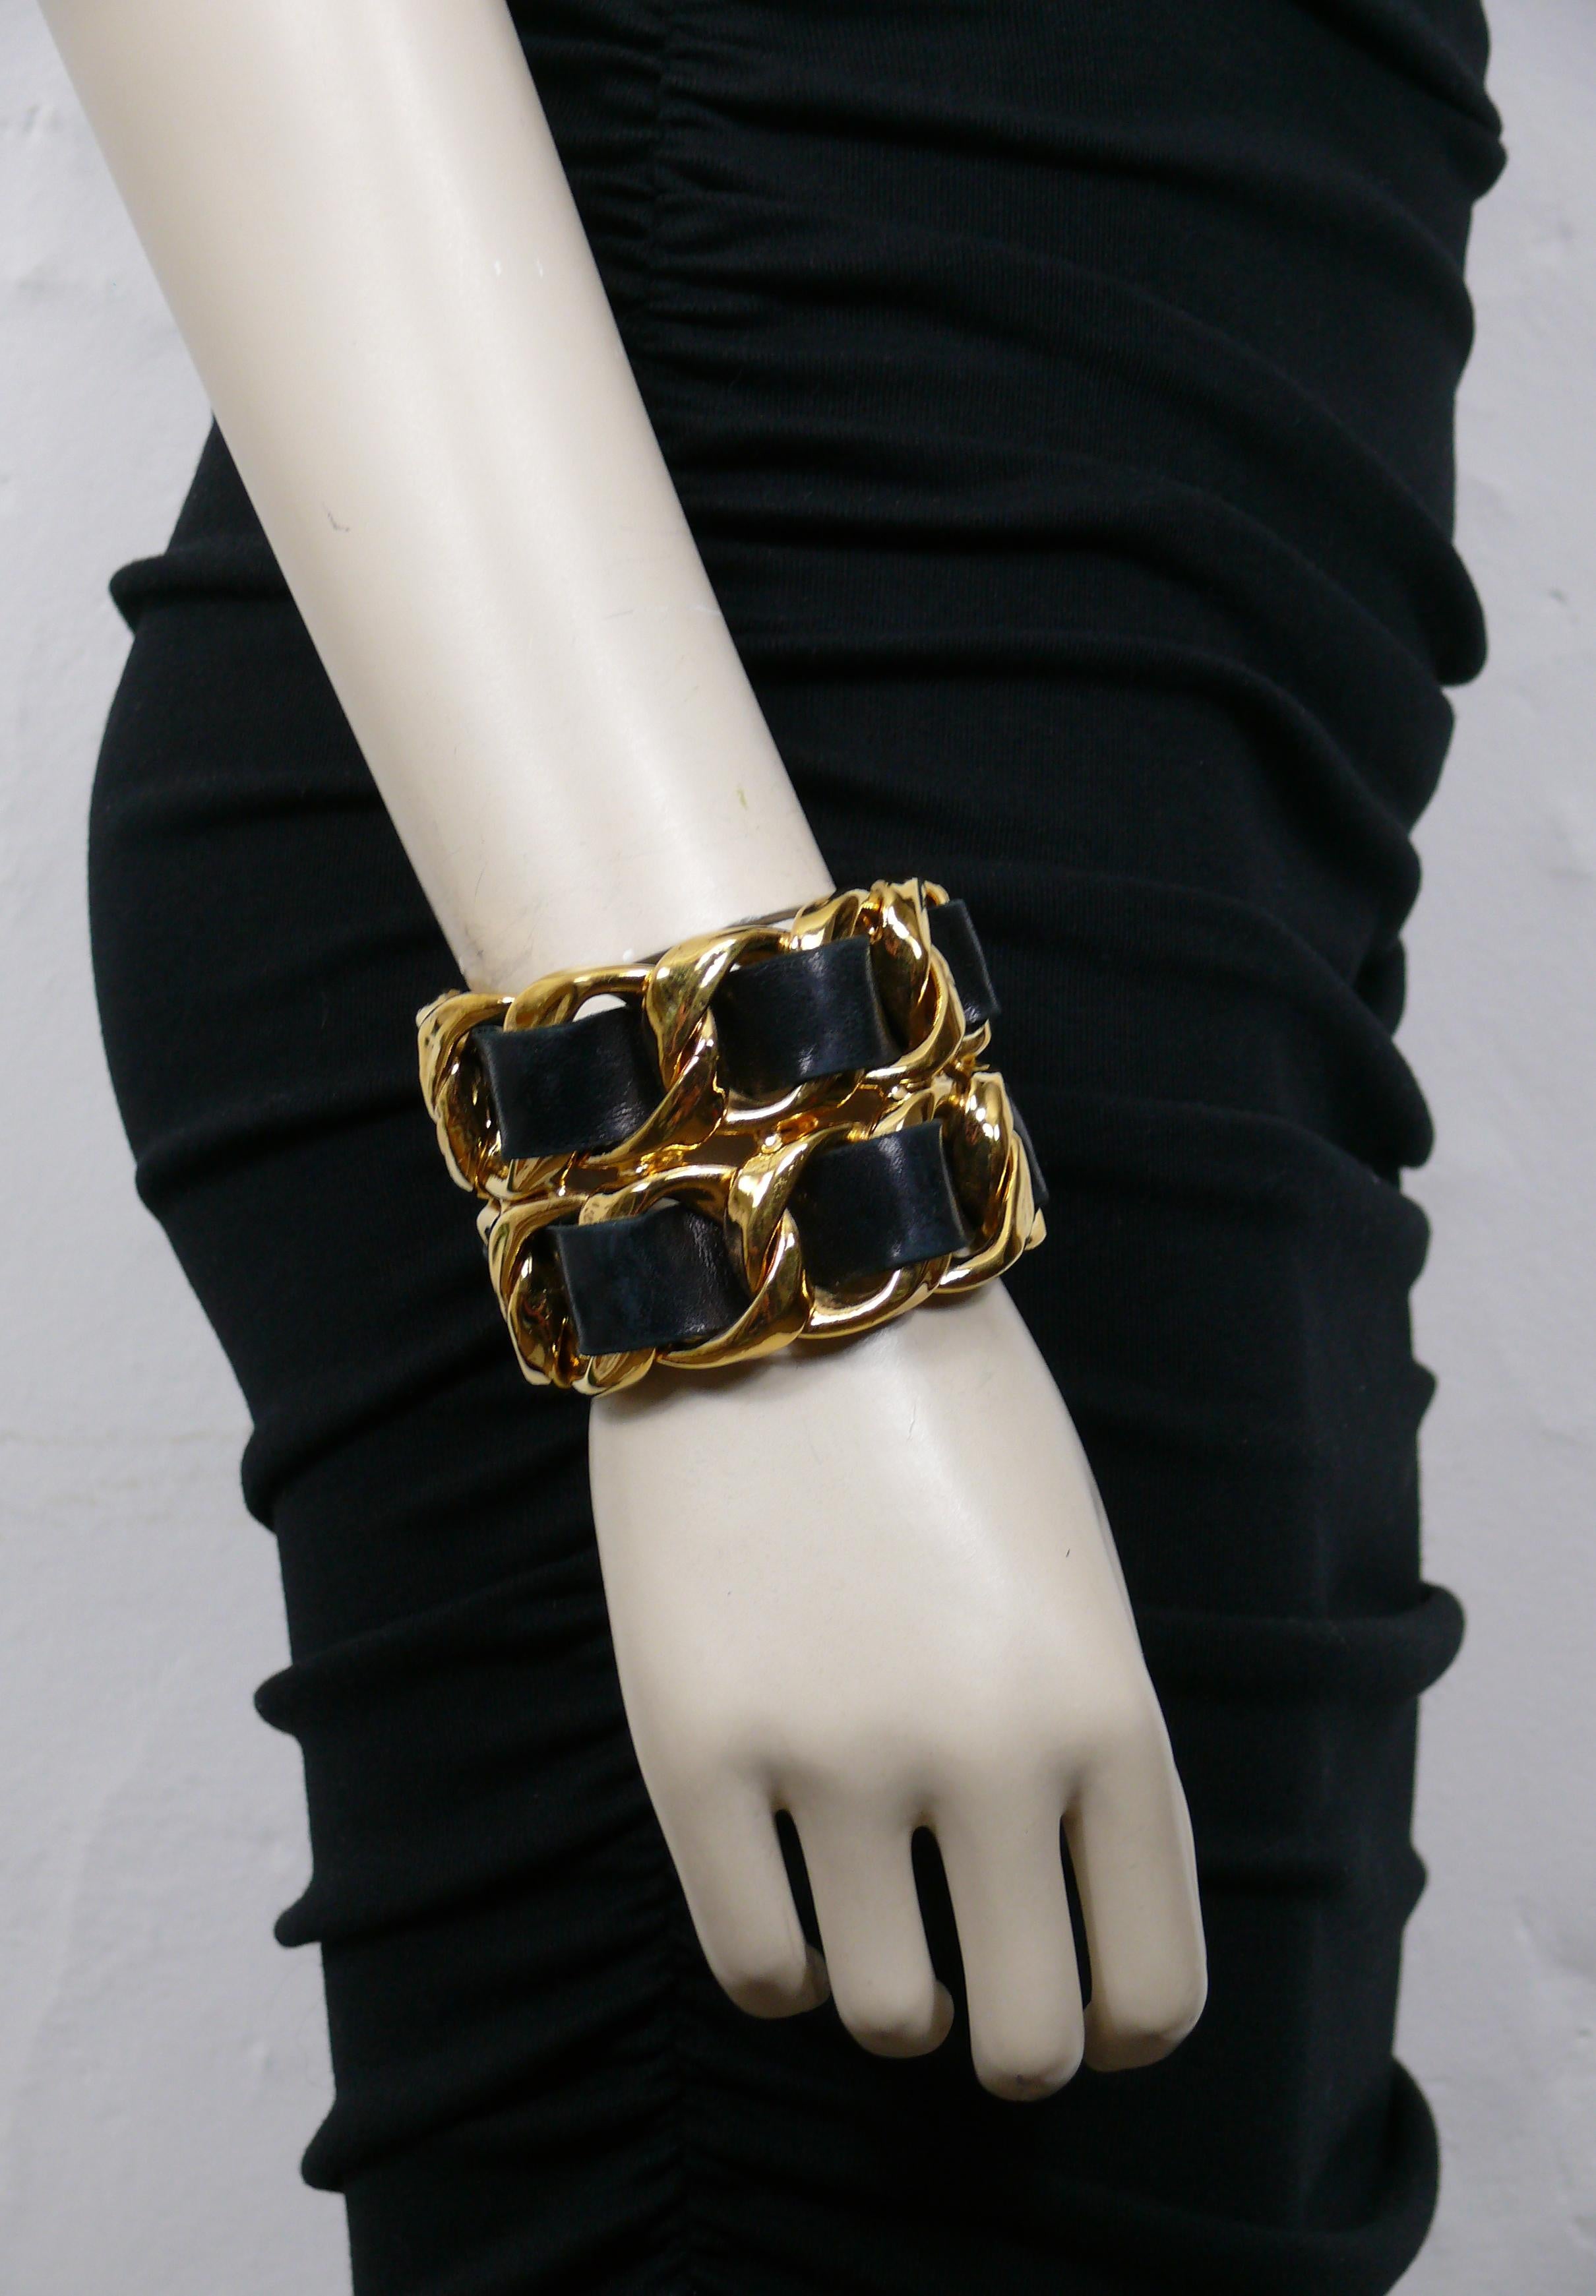 CHANEL by KARL LAGERFELD vintage iconic gold toned rigid chain cuff bracelet featuring woven black leather.

Collection year n°23 (1988).
VICTOIRE DE CASTELLANE era.

Embossed CHANEL 2 3 Made in France.

Indicative measurements : inner circumference